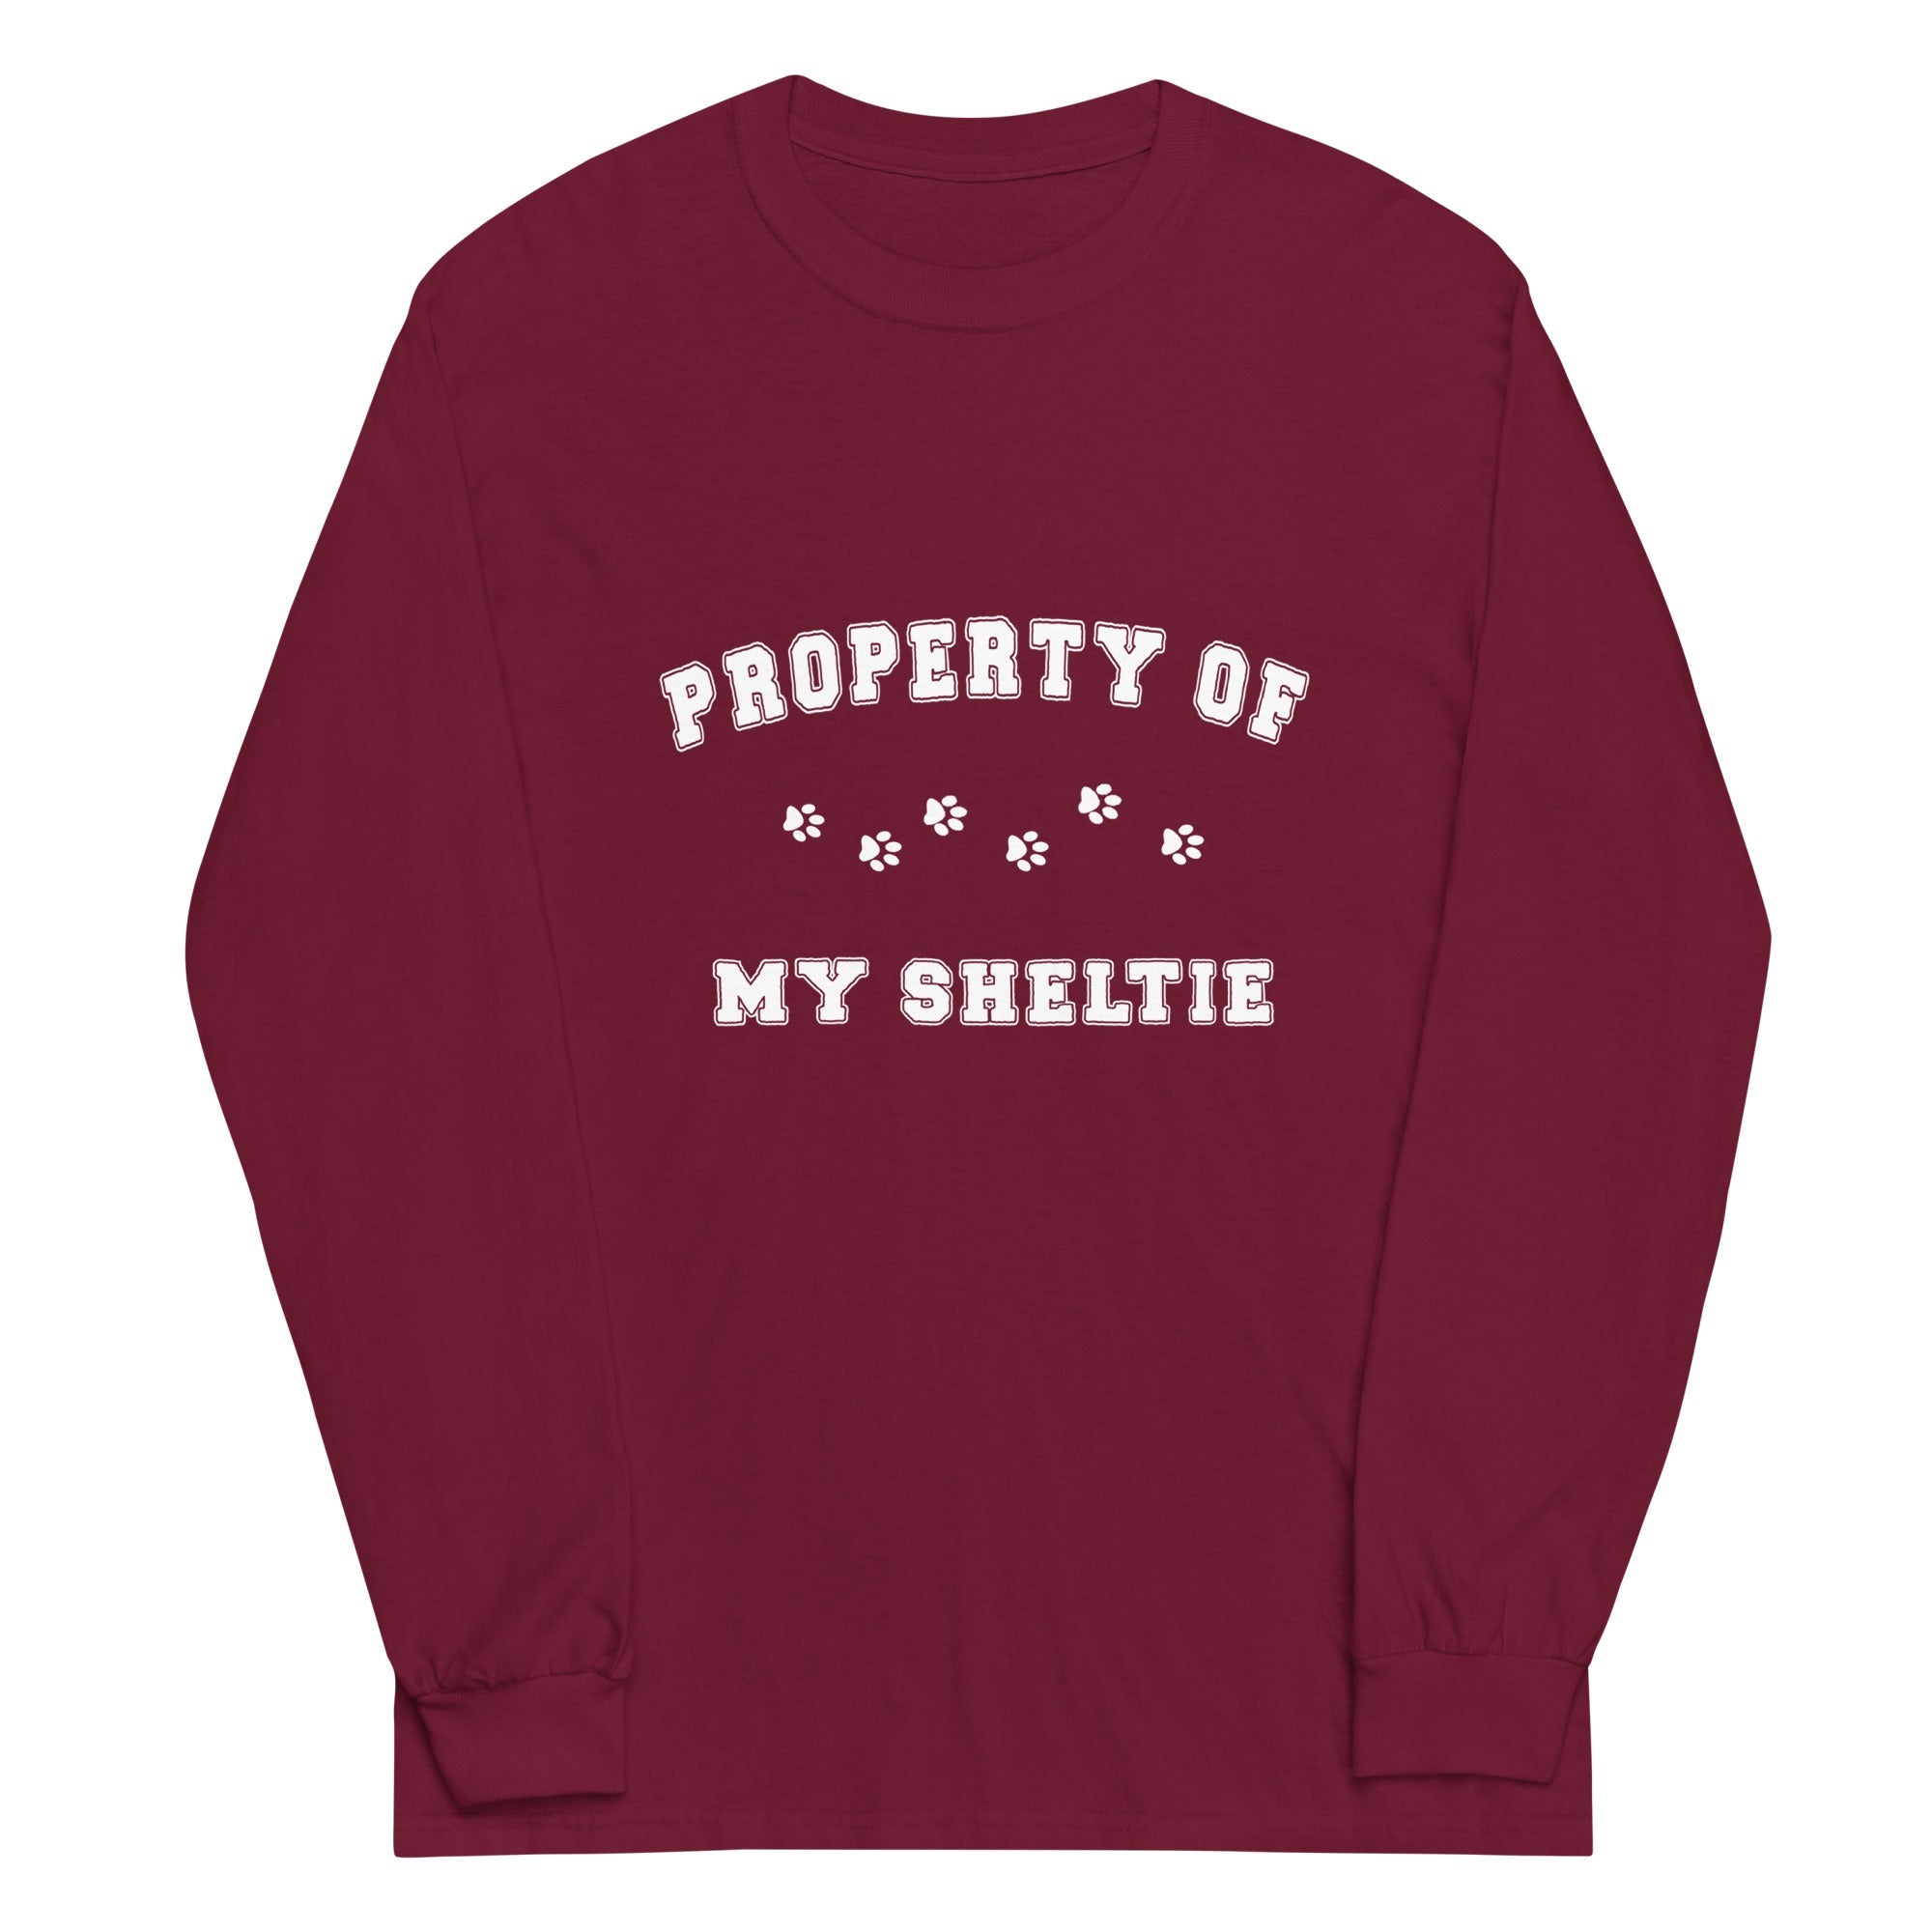 &quot;Property of my Sheltie&quot; Long Sleeve T-shirt For Men&